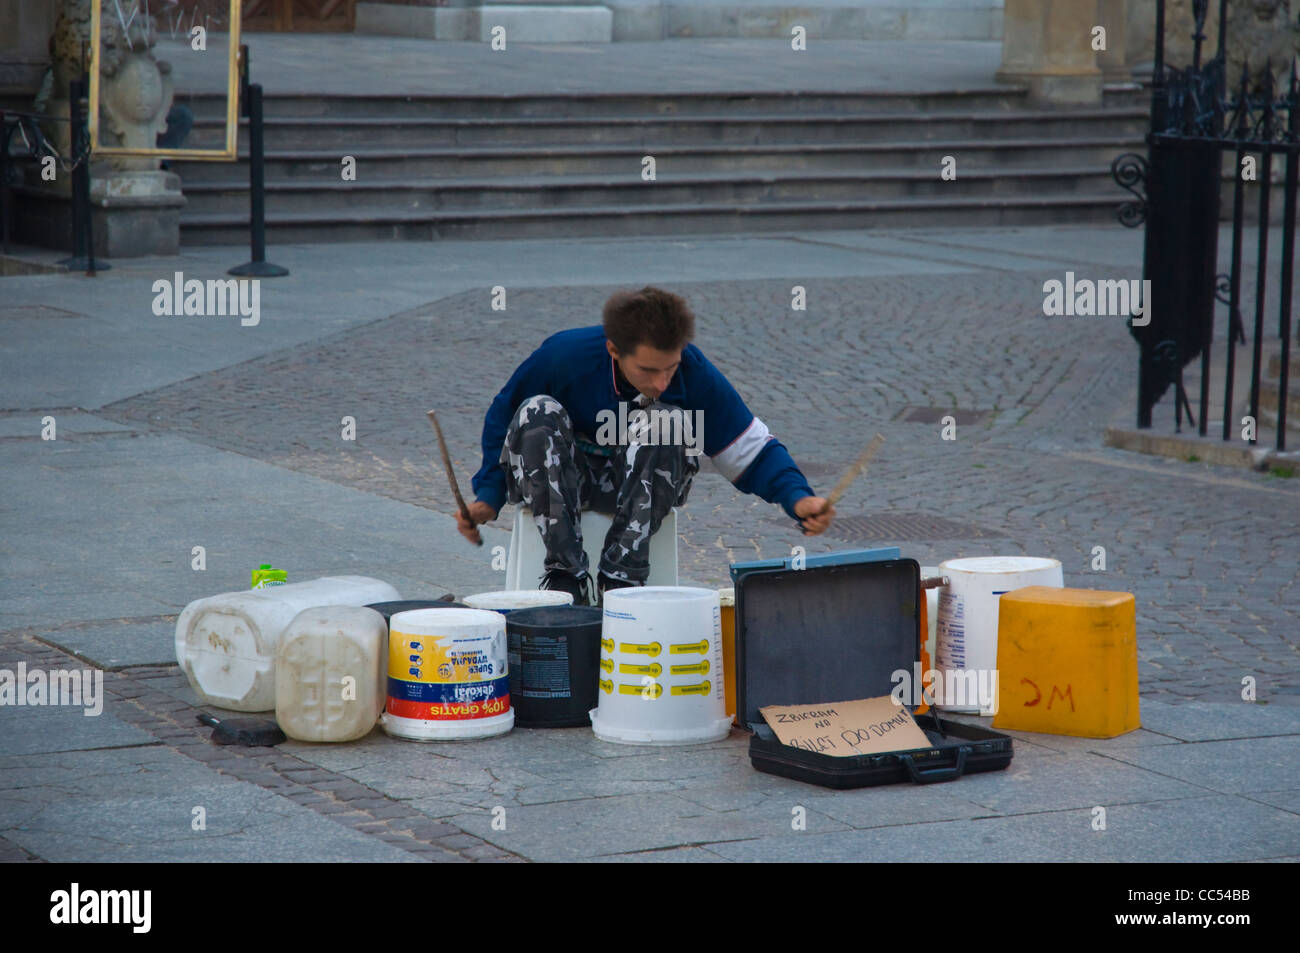 Busker using plastic containers as drums at Dlugi Targ square main town Gdansk Warsaw Poland Europe Stock Photo